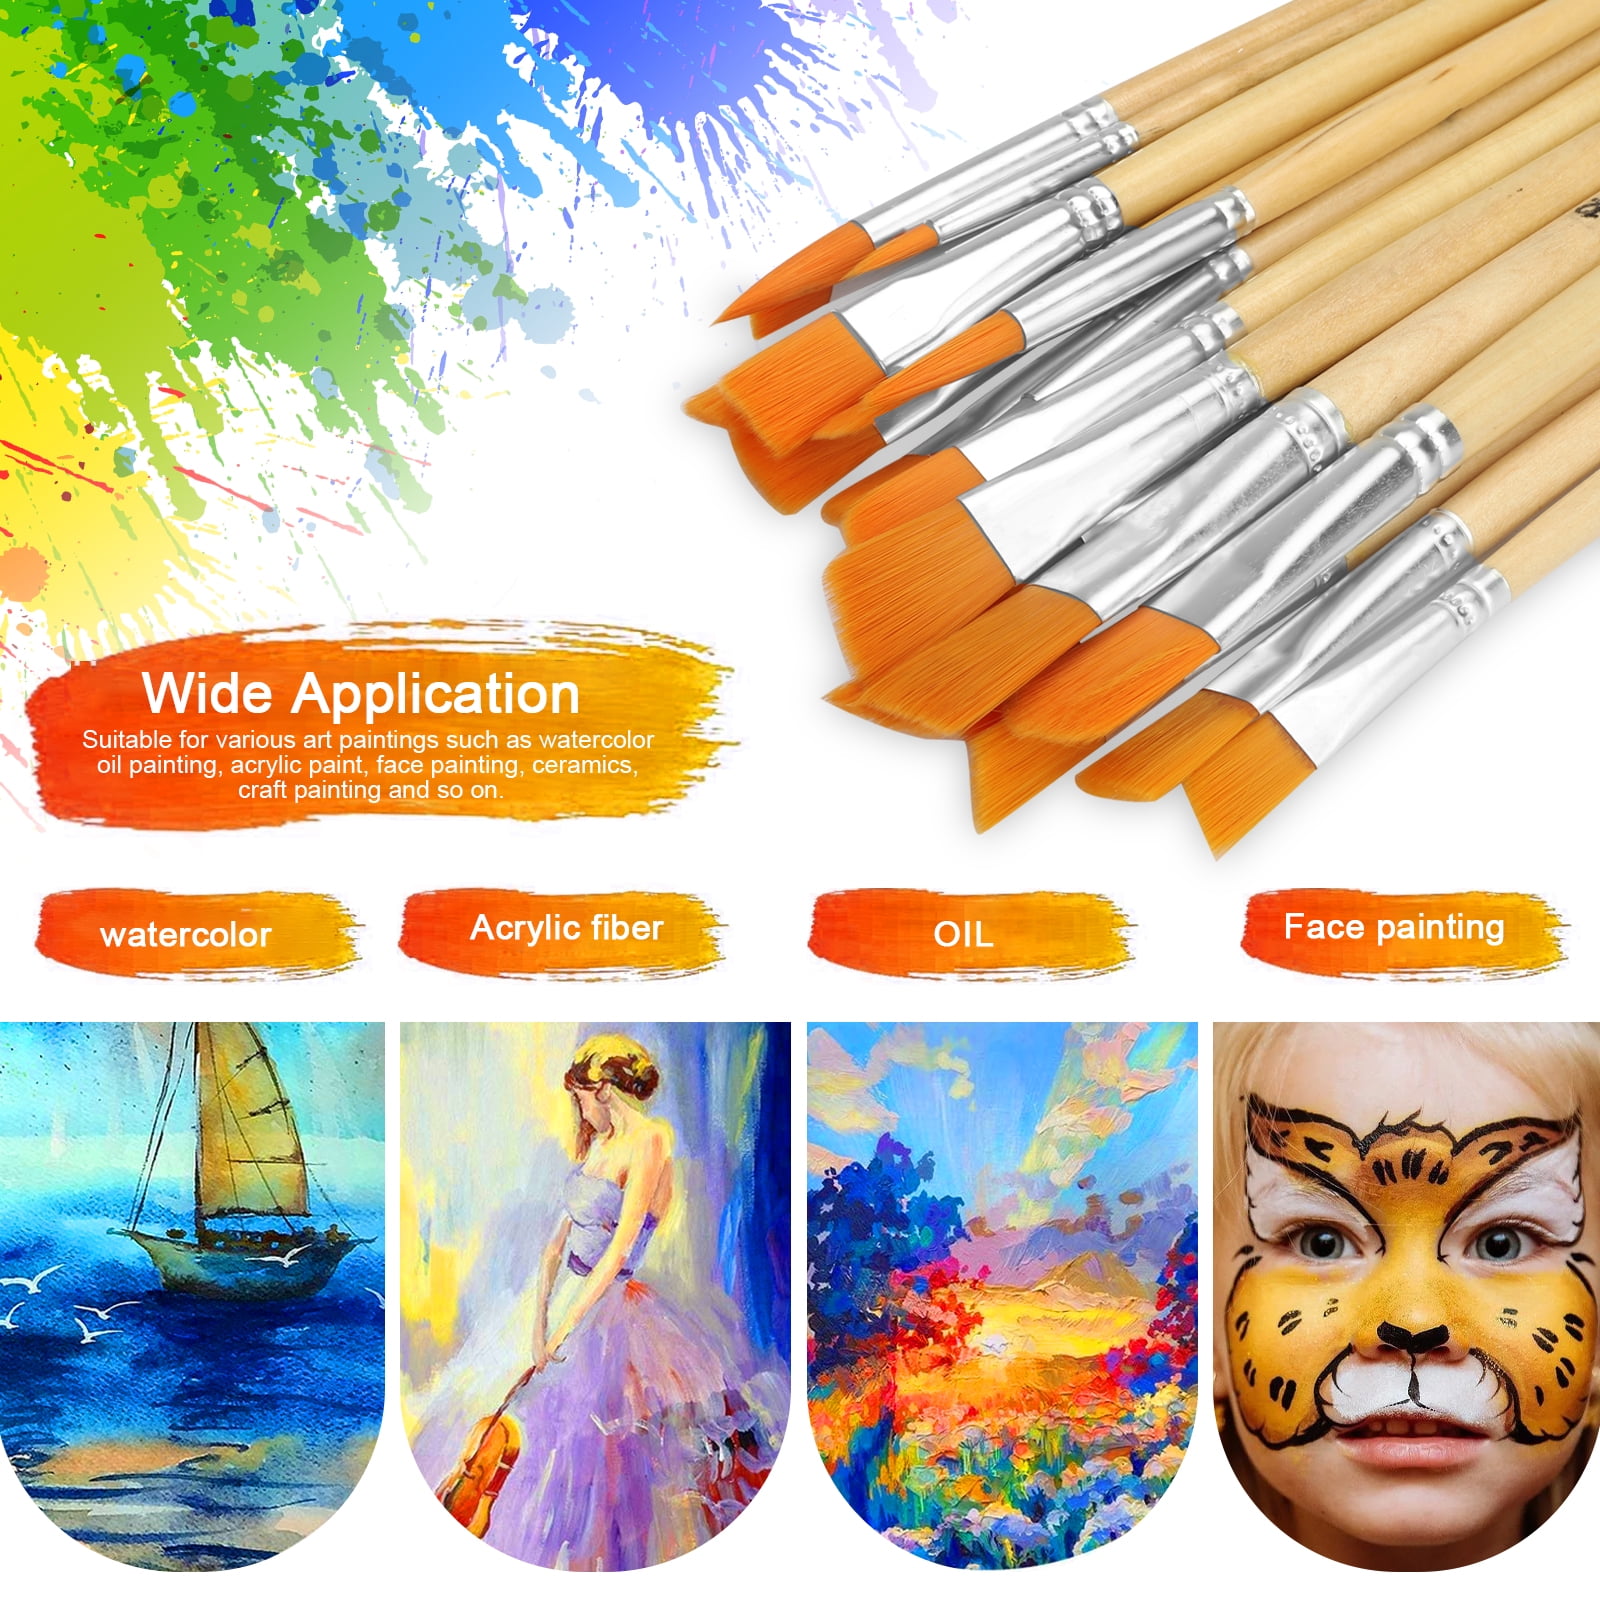 Incraftables Assorted Paint Brushes Set 25pcs. All Purpose Small & Big  Craft Paint Brushes for Acrylic, Oil, Watercolor, Wood, Paper & Fabric  Painting. Bulk Art Paintbrush for Artist, Kids & Adults